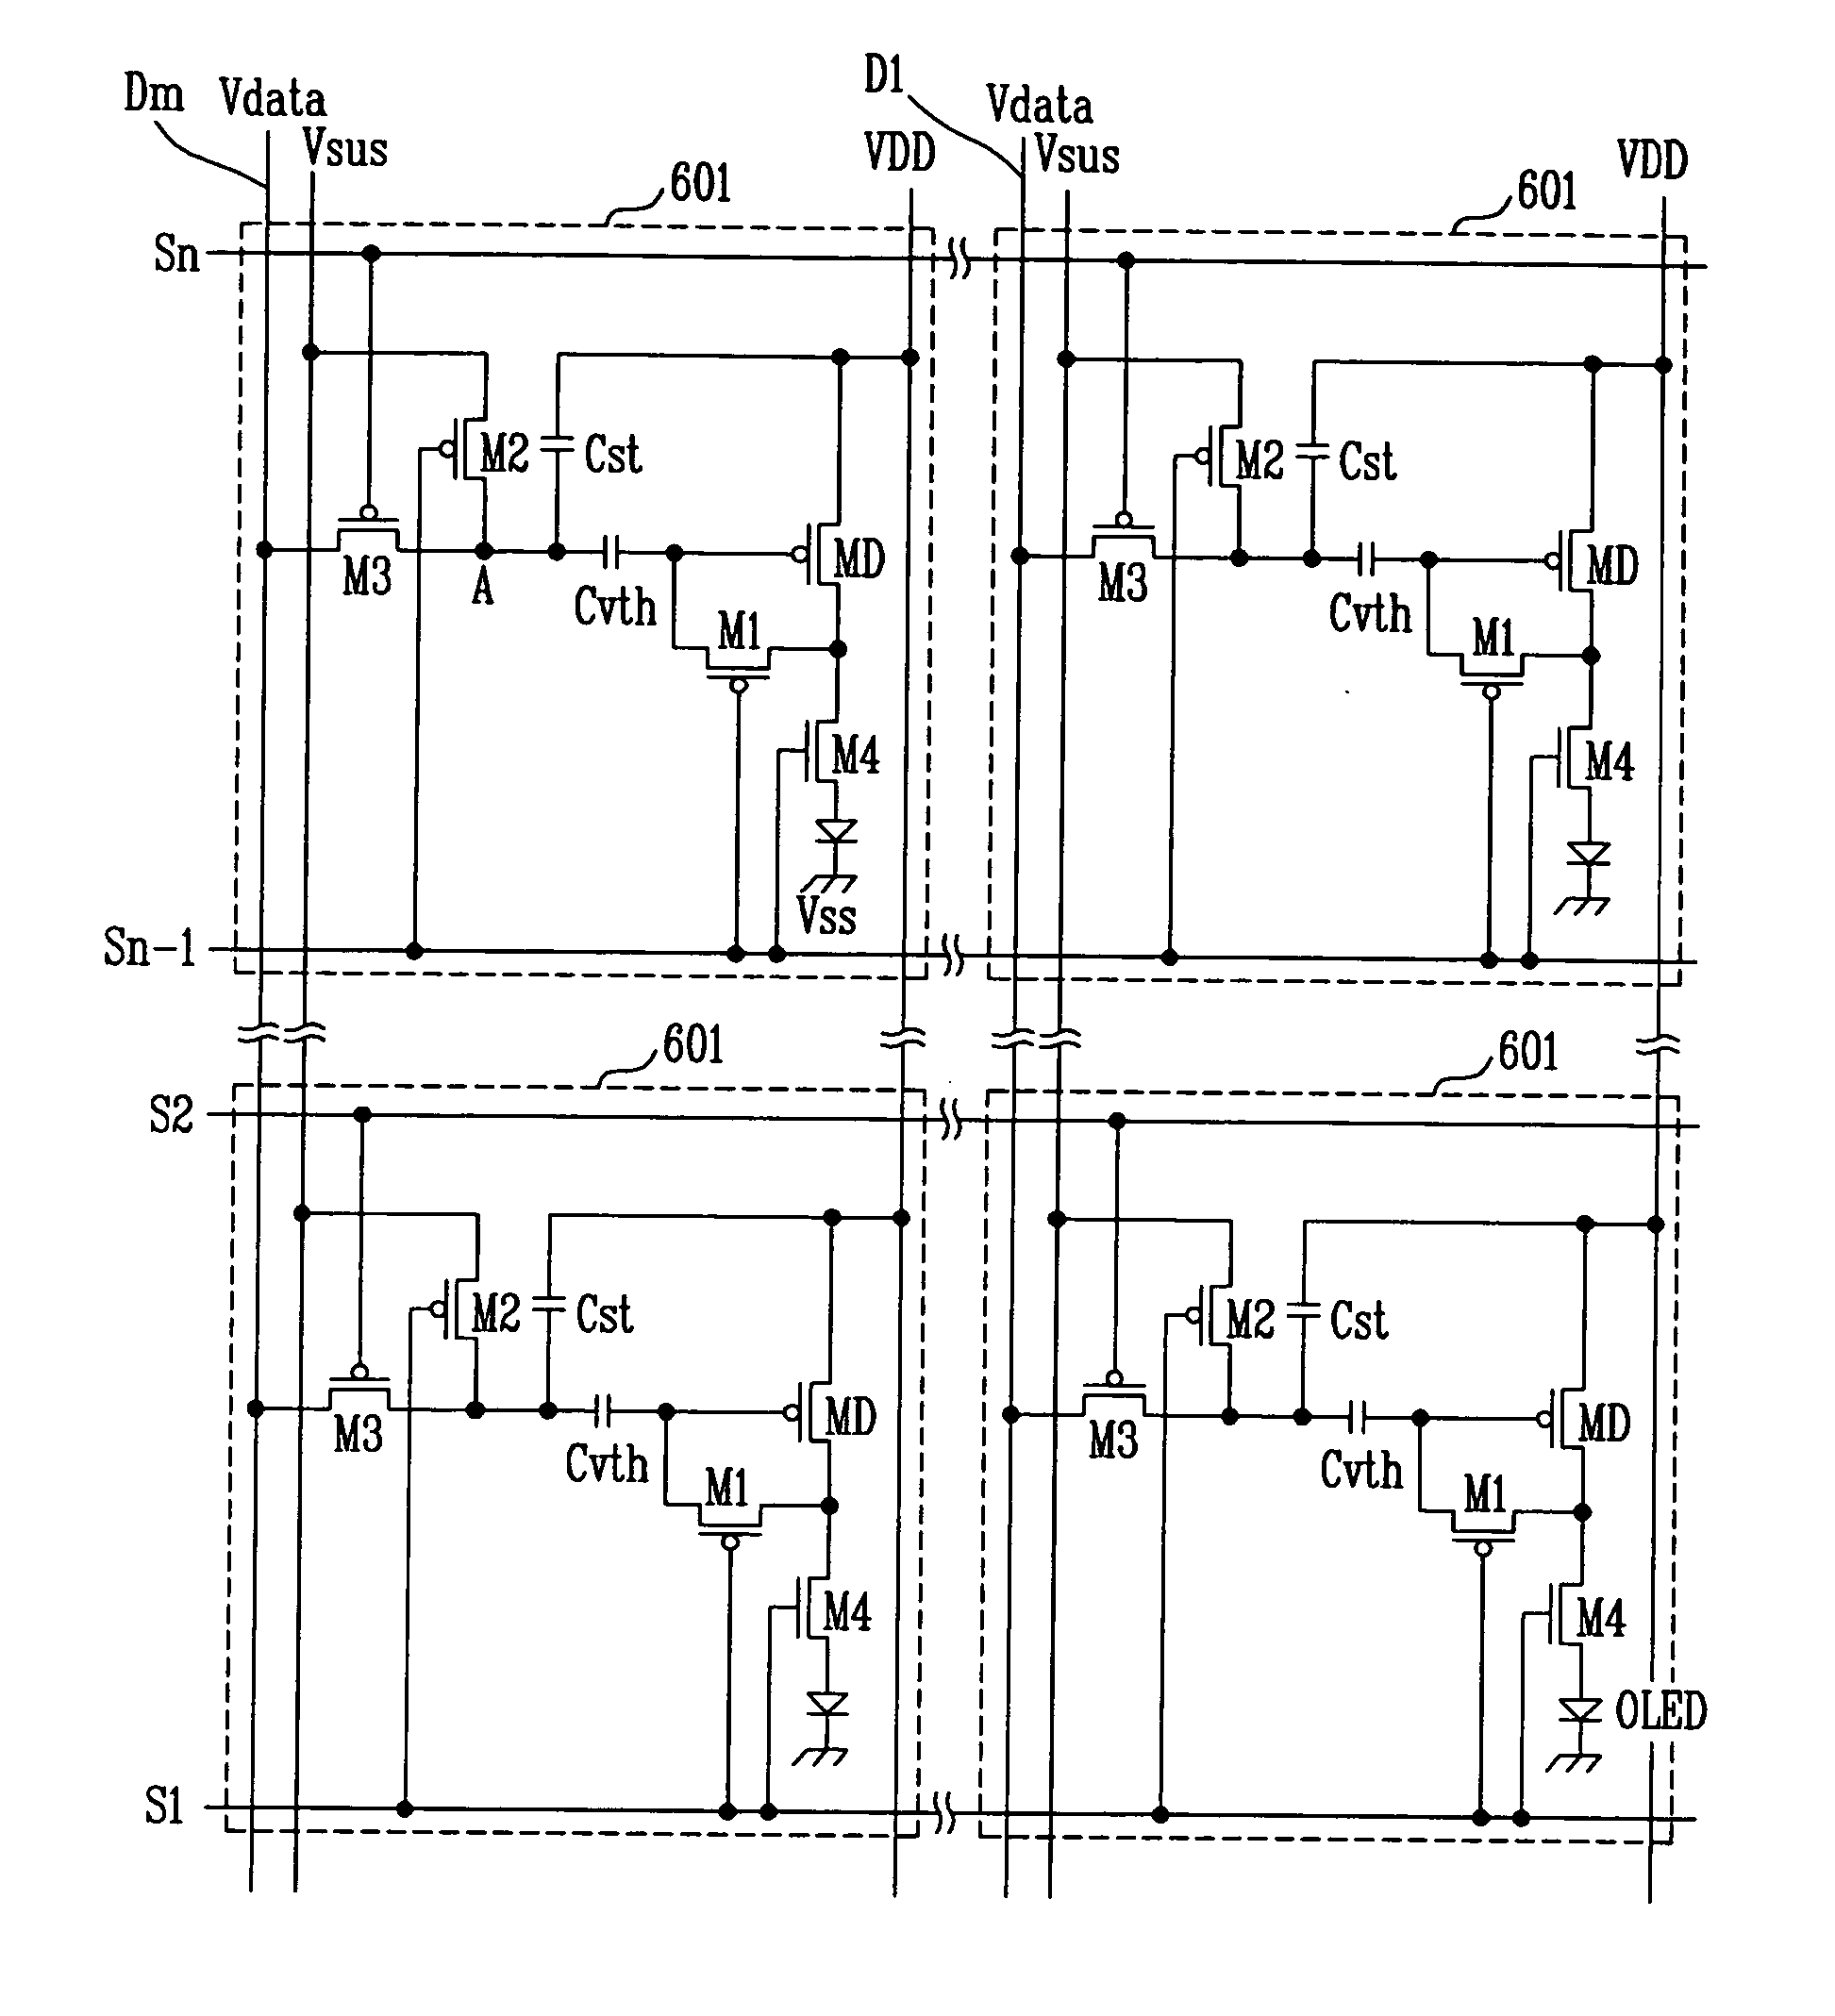 Light emitting diode display circuit with voltage drop compensation